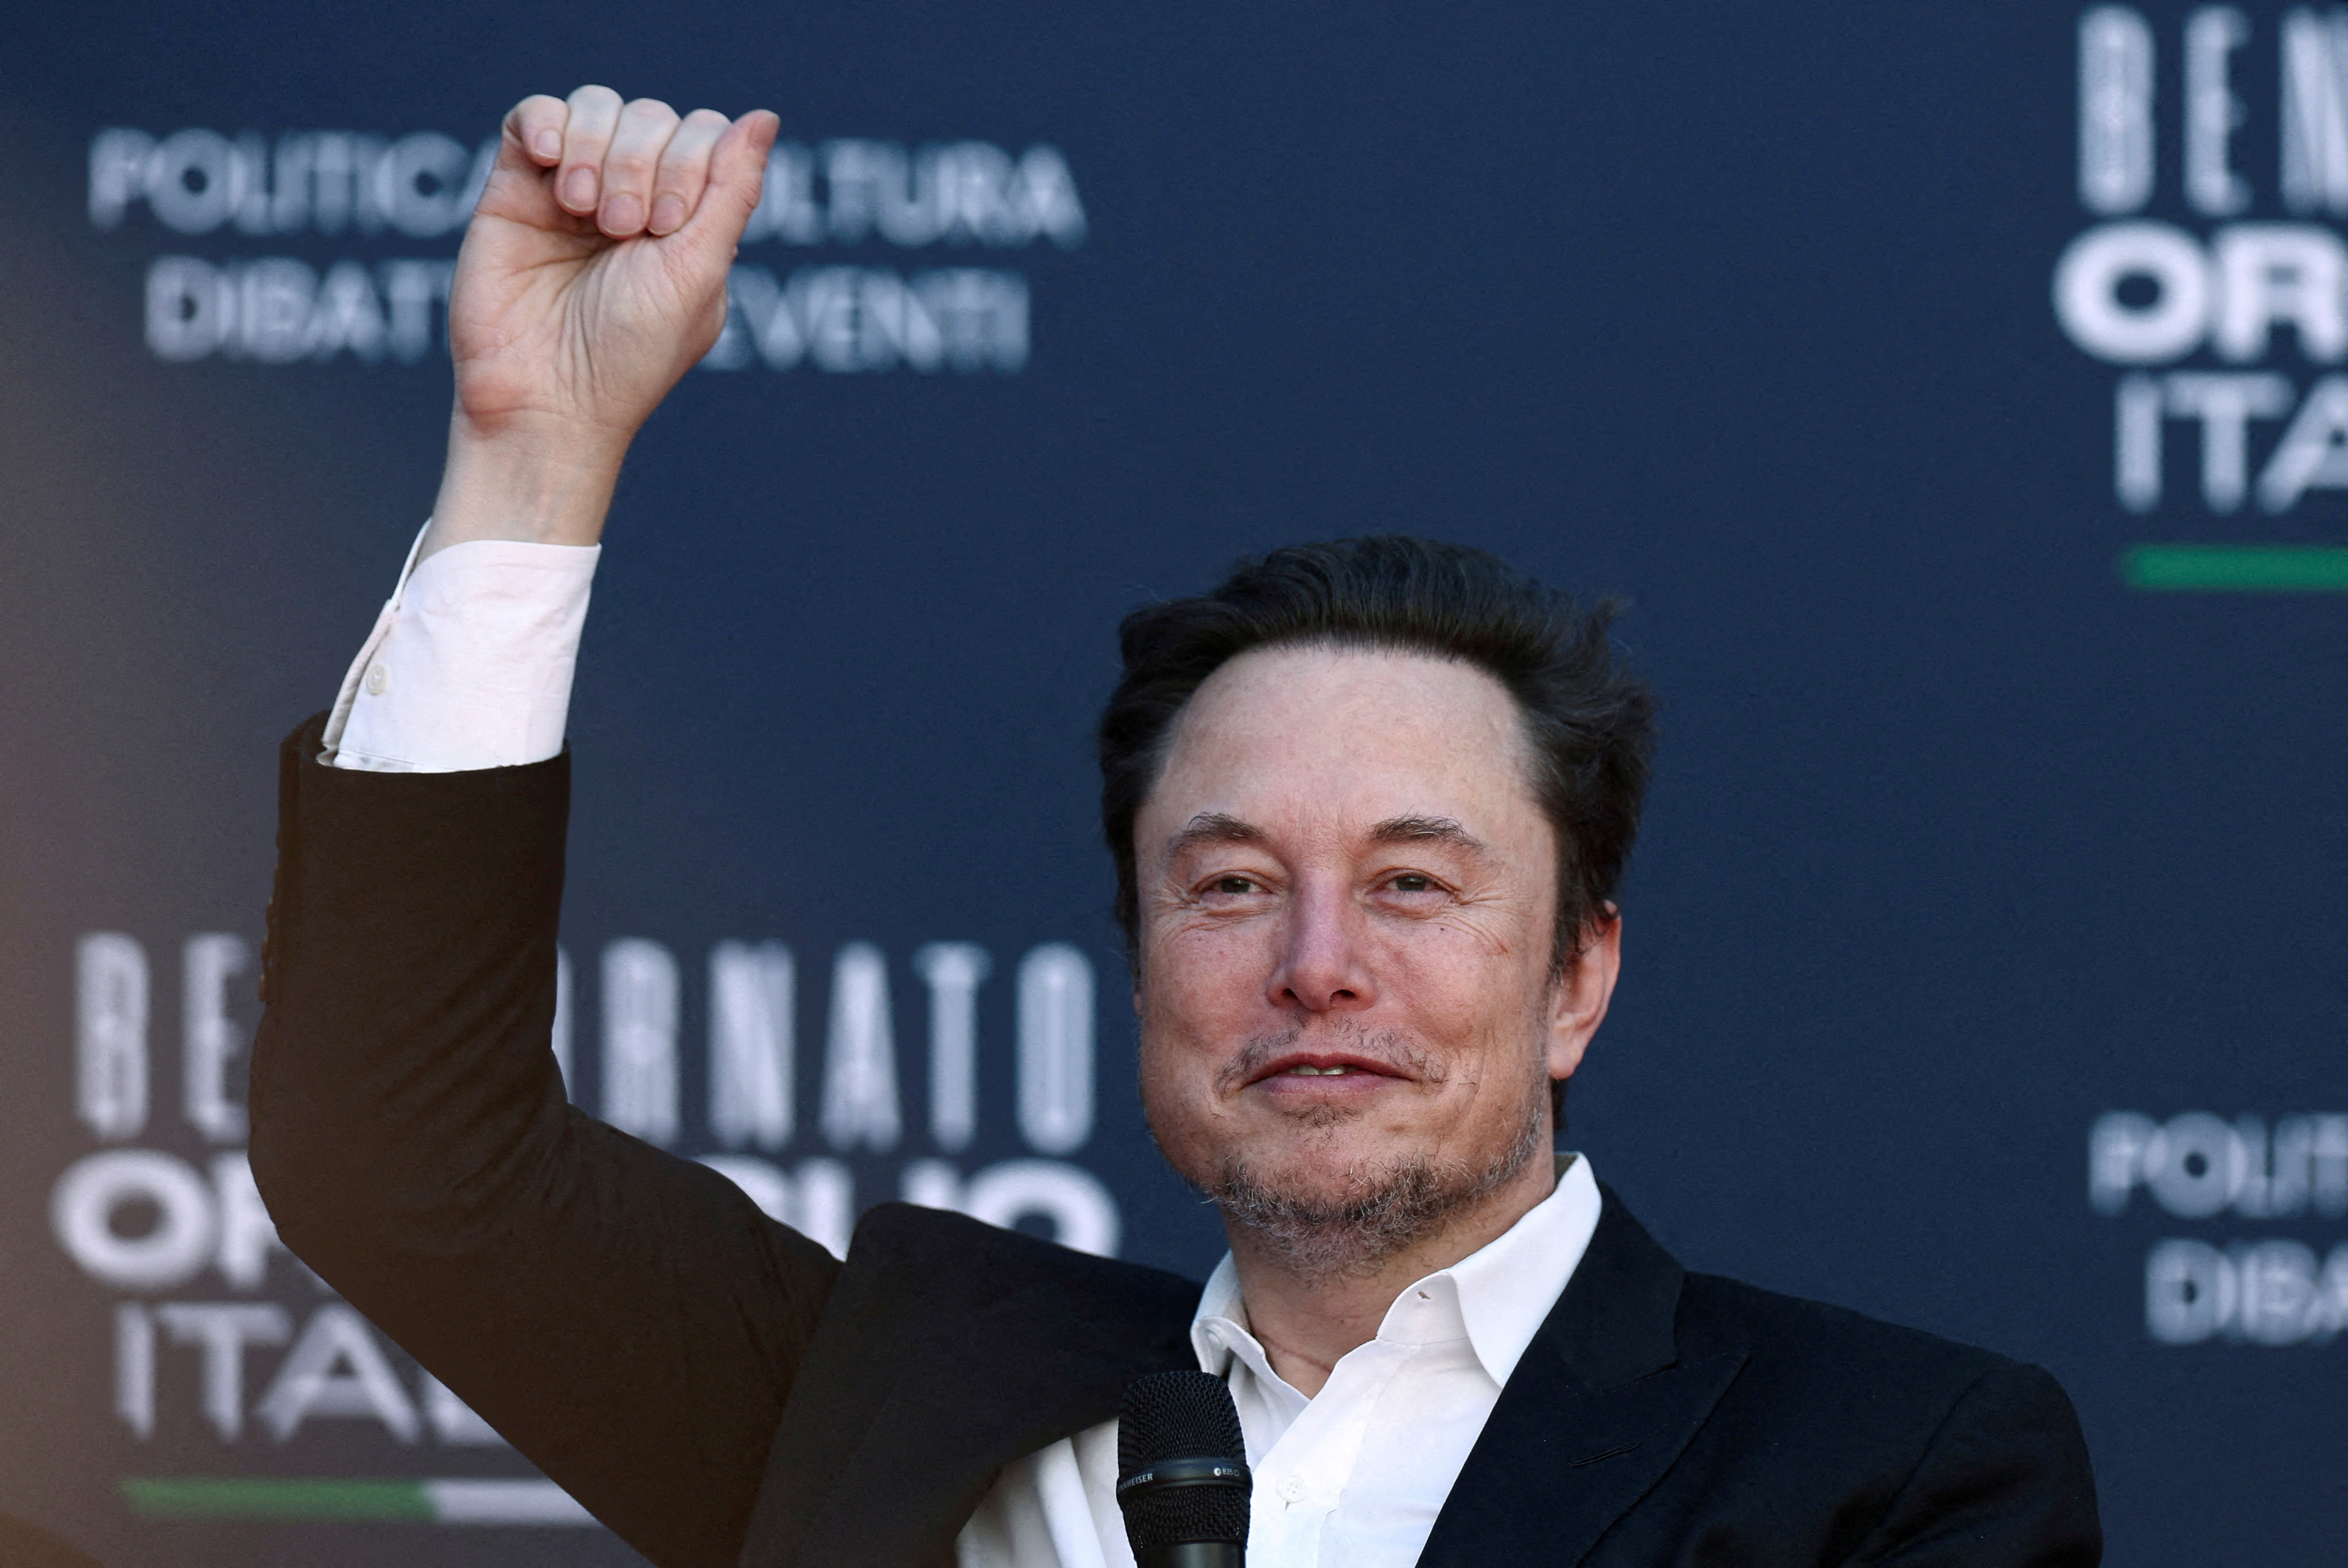 Tesla's Musk is pictured in Rome